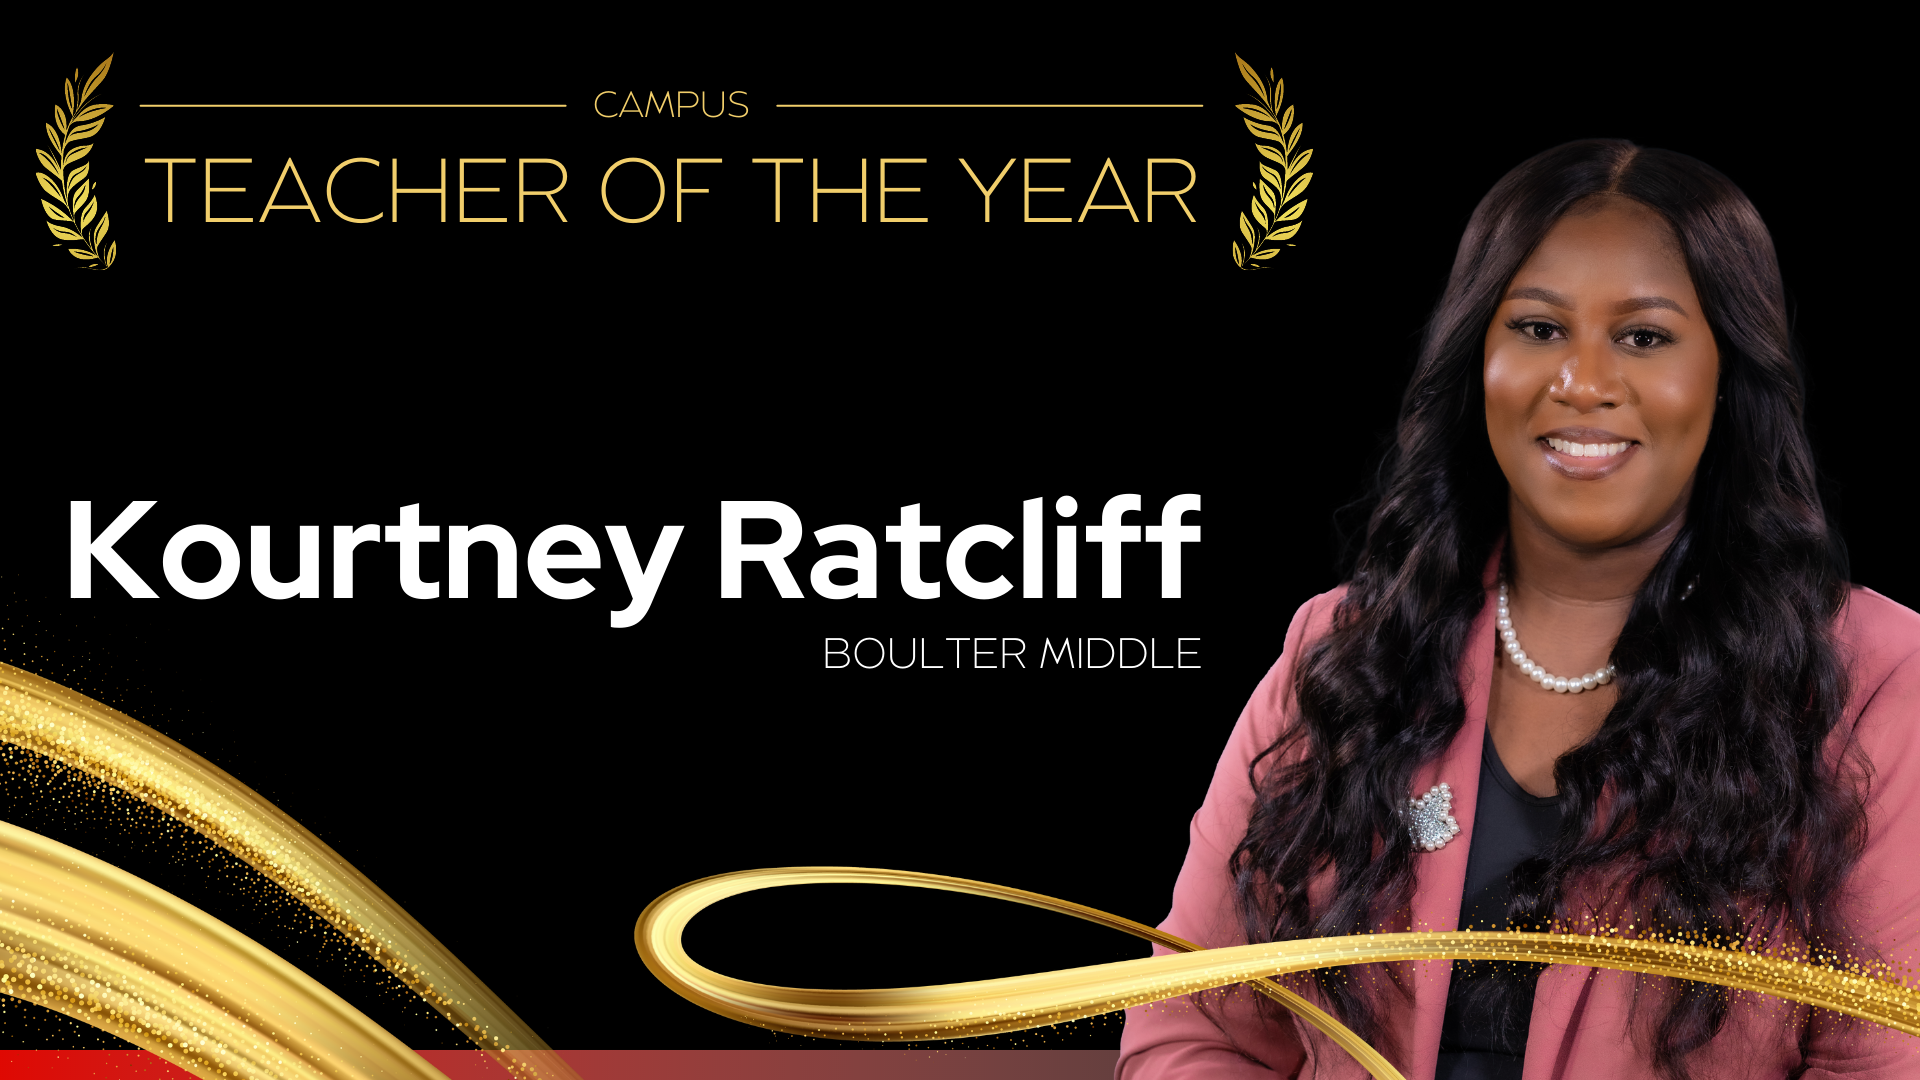 Campus Teacher of the Year Boulter Middle School - Kourtney Ratcliff 